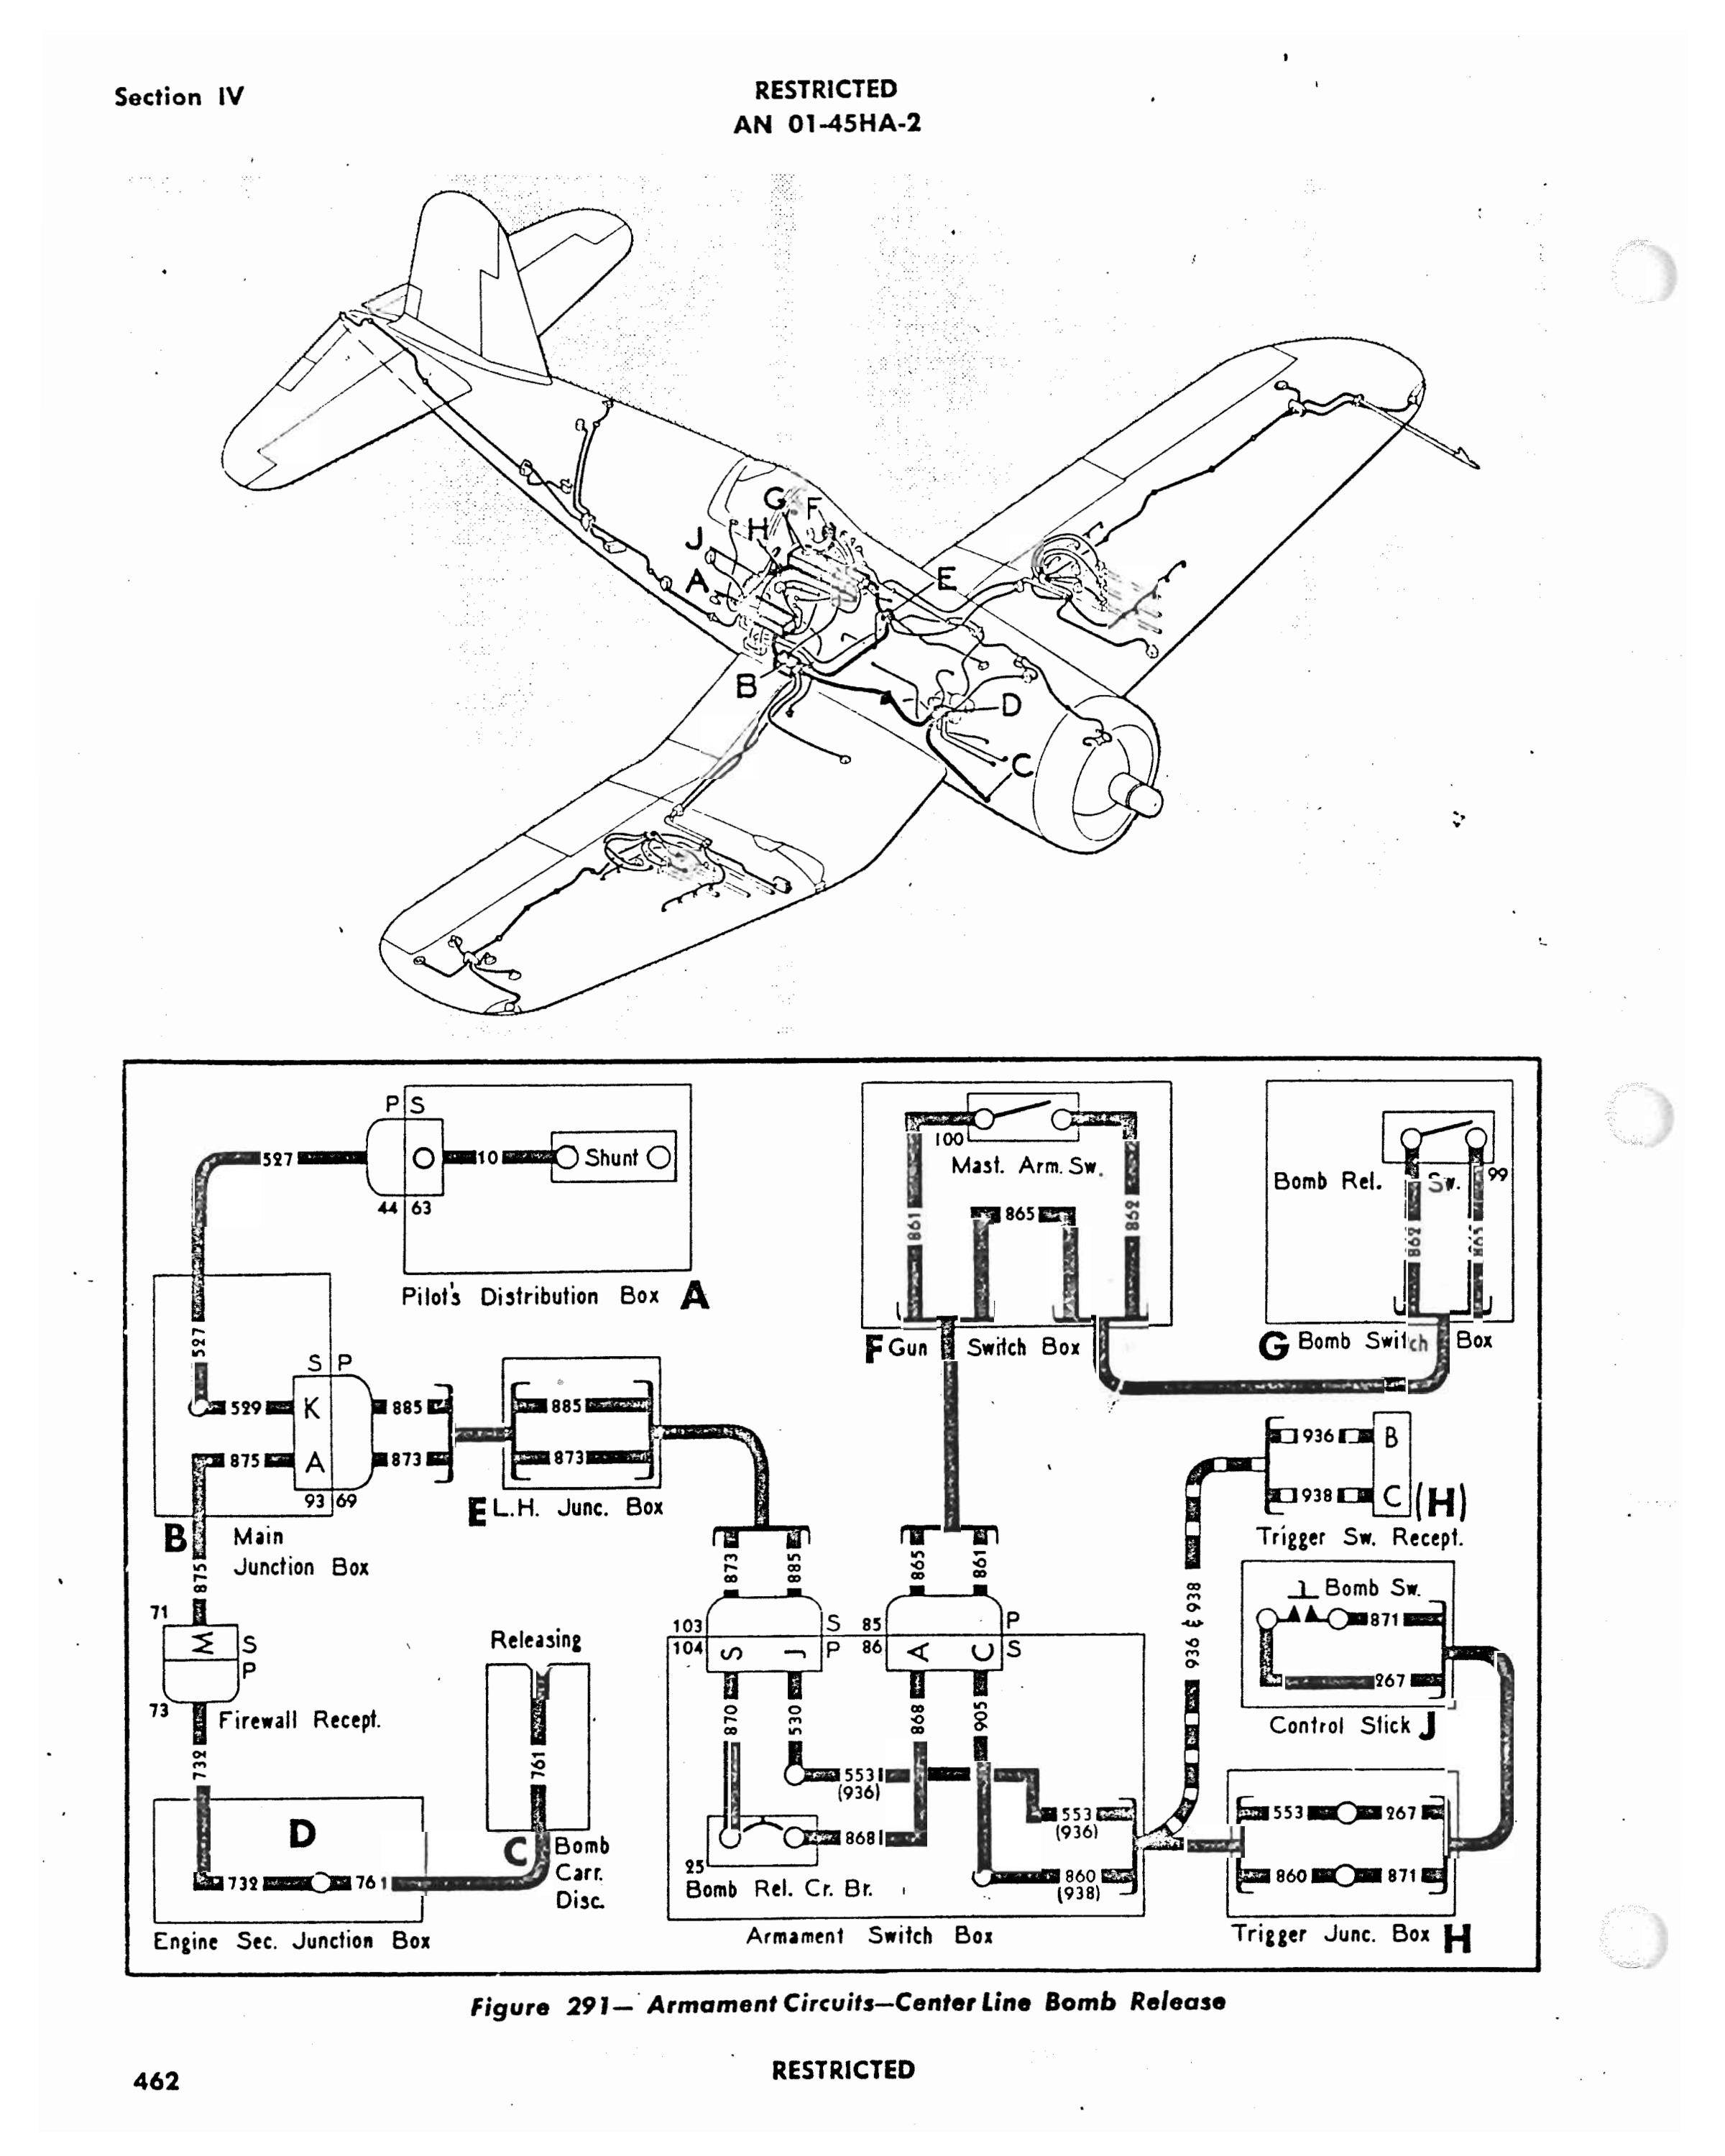 Sample page 484 from AirCorps Library document: Erection & Maintenance Handbook - Corsair